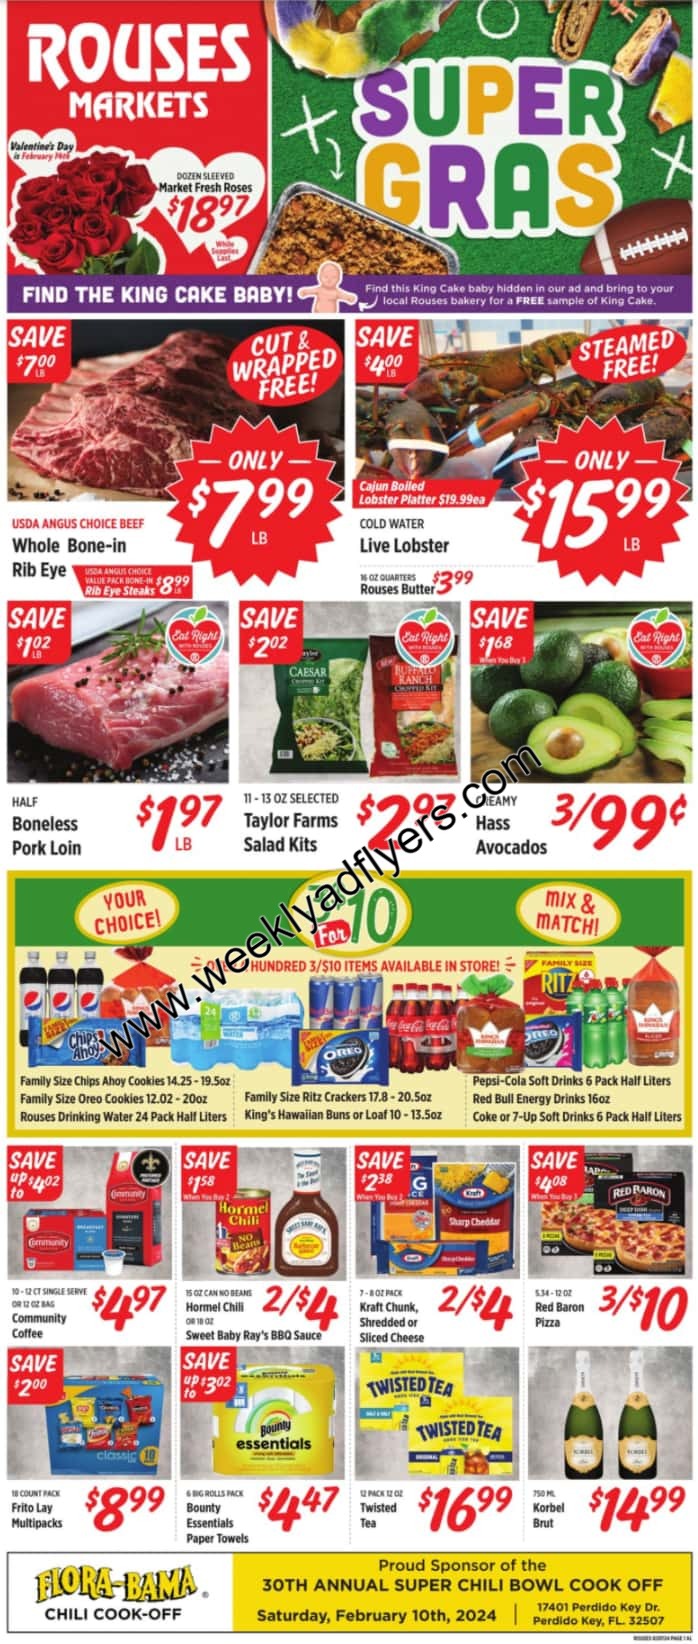 Rouses Weekly Ad February 28 to March 5, 2024 1 – rouses ad 1